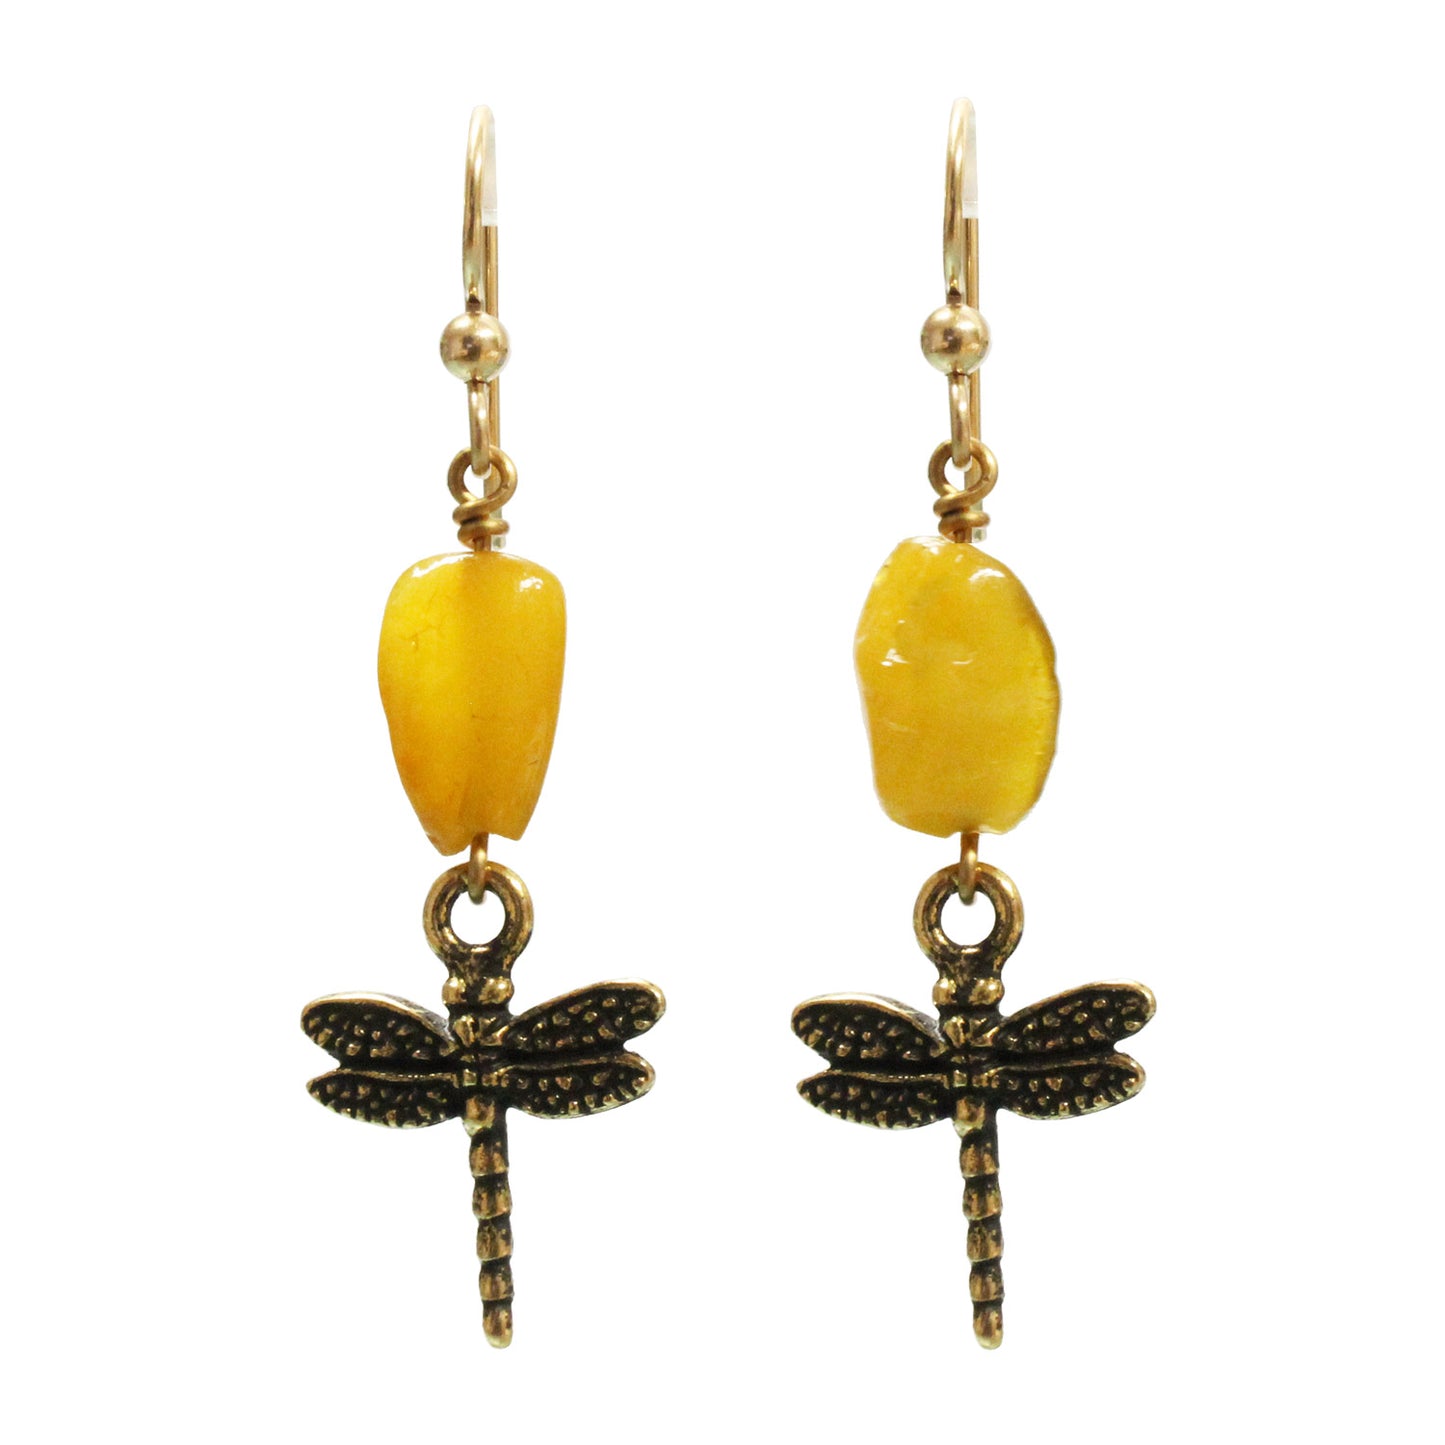 Dragonfly Amber Earrings / 50mm length / gold filled earwires